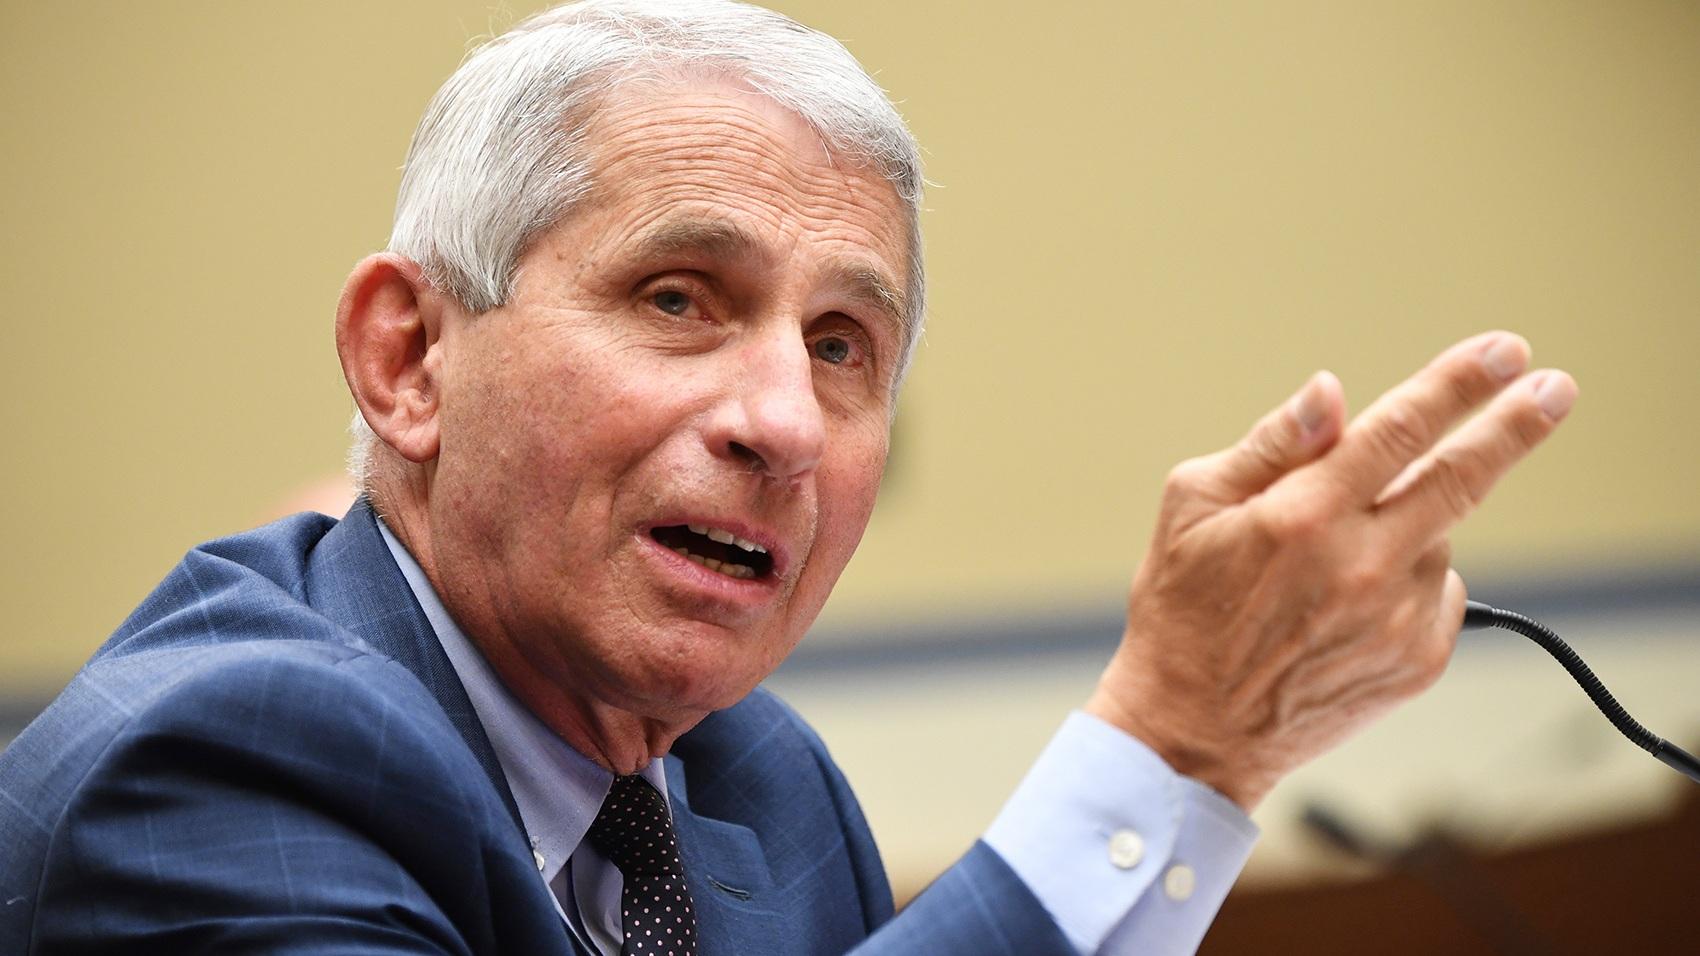 Dr. Anthony Fauci, director of the National Institute for Allergy and Infectious Diseases, testifies before a House Subcommittee on the Coronavirus Crisis hearing on July 31, 2020 in Washington, DC. (Photo by Kevin Dietsch-Pool / Getty Images)